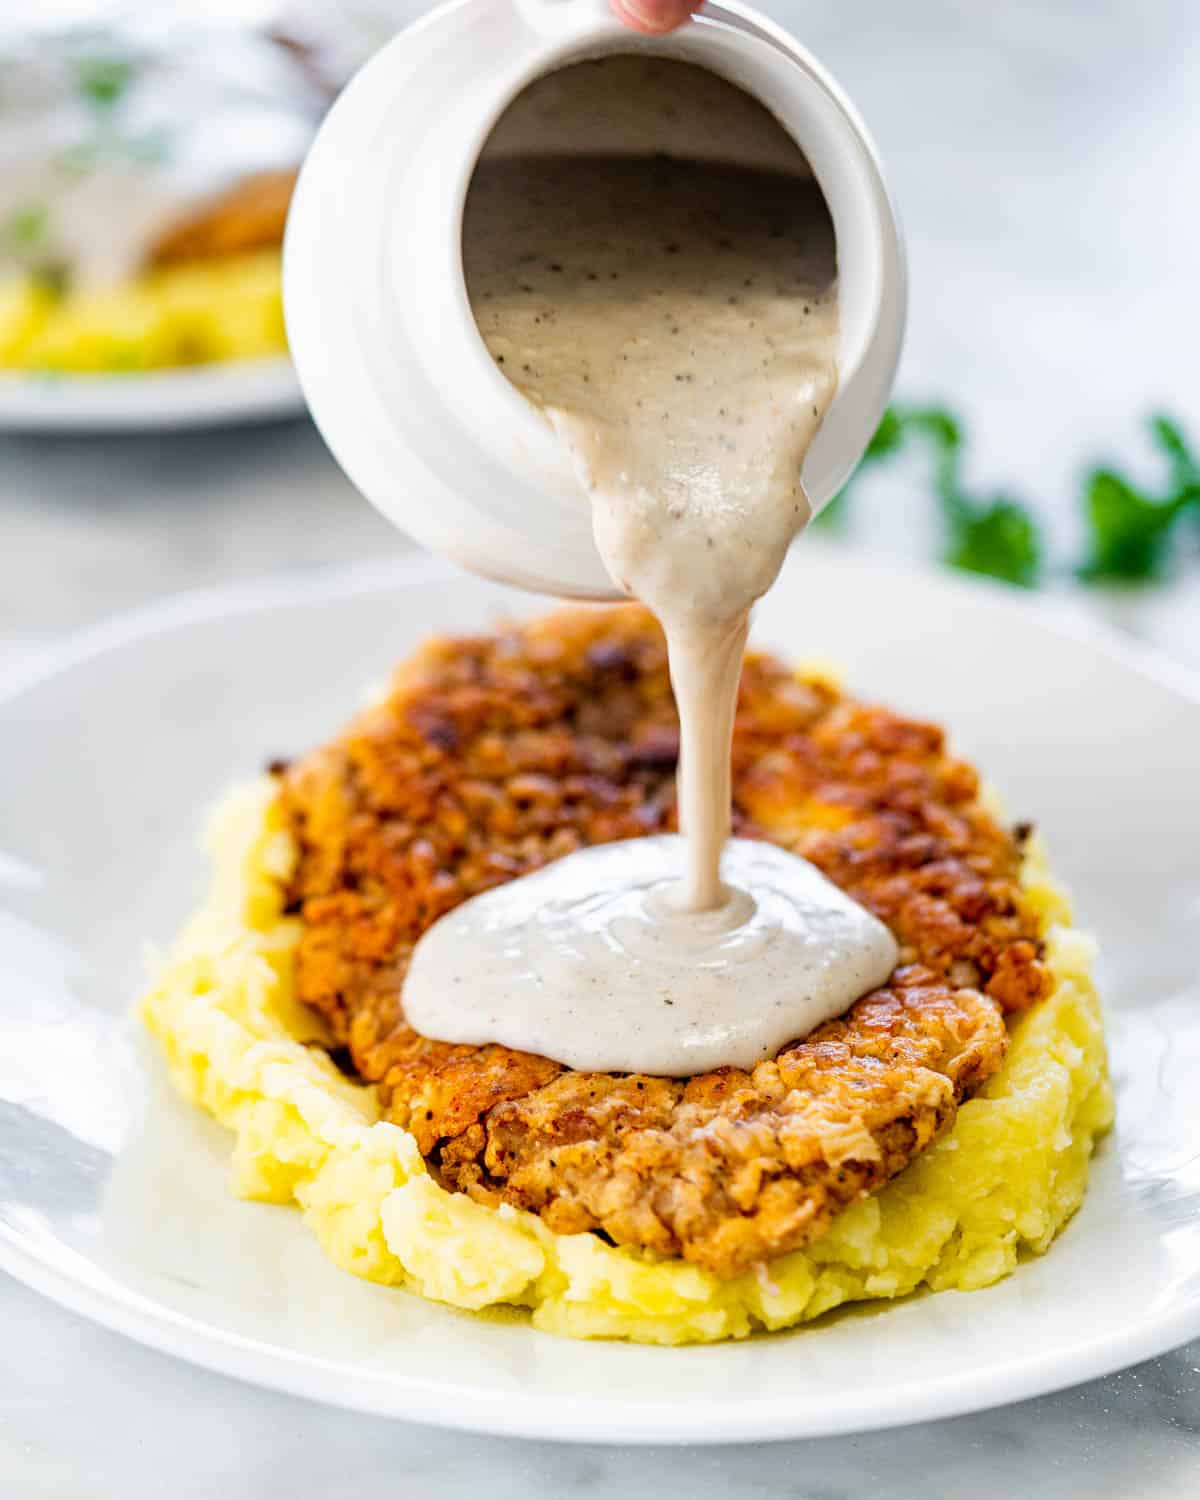 pouring gravy from a jug over a plate with mashed potatoes and chicken fried steak